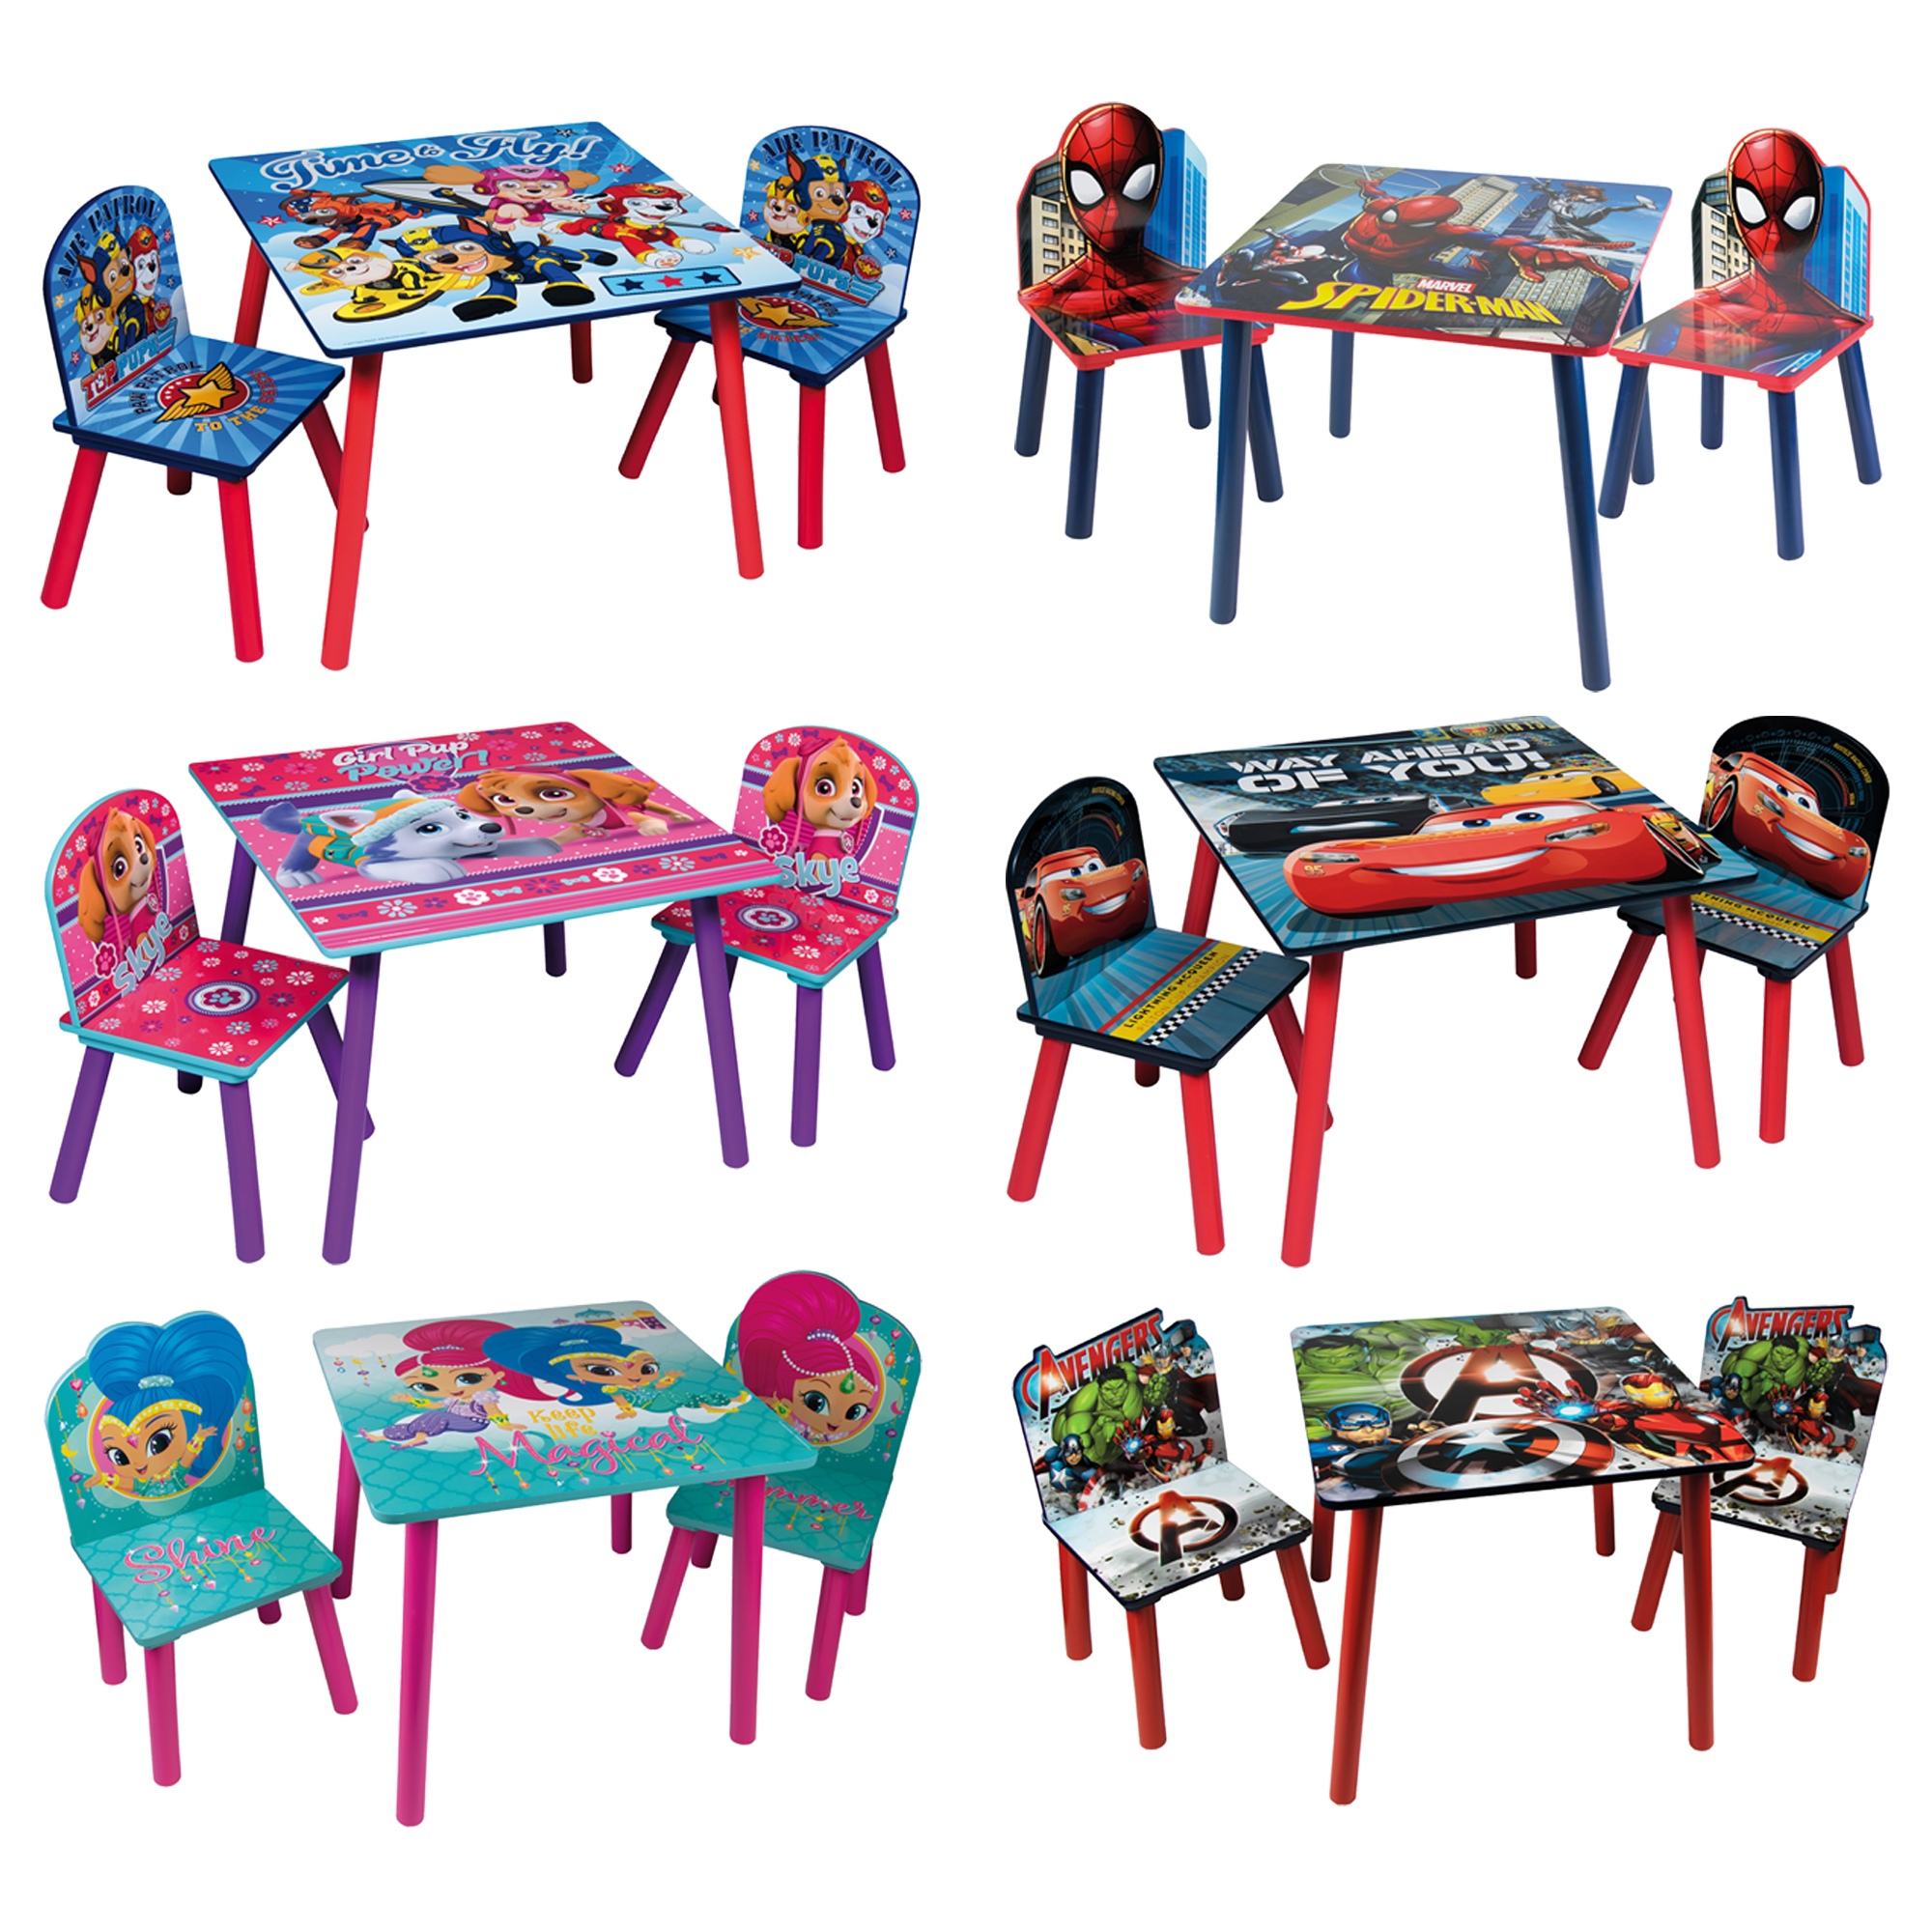 spiderman desk and chair set